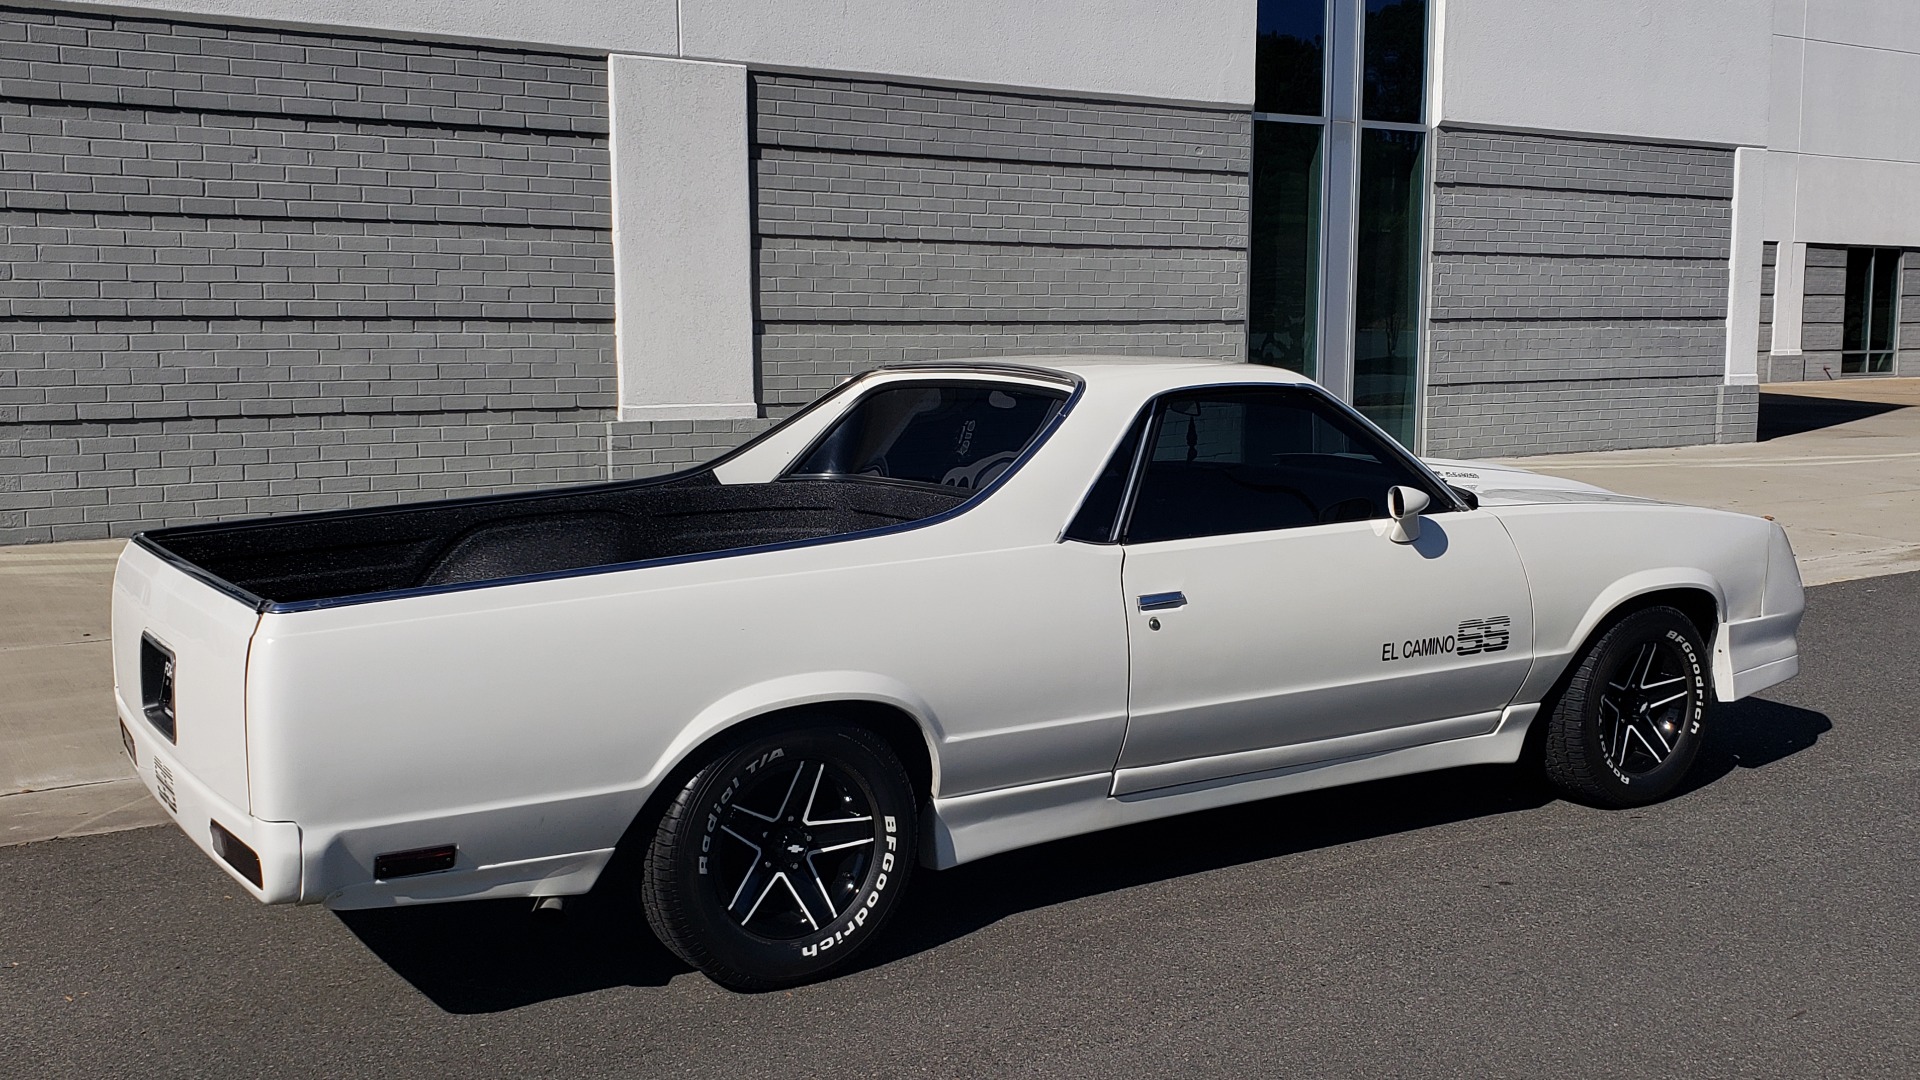 Used 1979 Chevrolet EL CAMINO SS / NEW 350 V8 / AUTO / COWL HOOD / CUSTOM SOUND / FLOWMASTERS for sale Sold at Formula Imports in Charlotte NC 28227 14